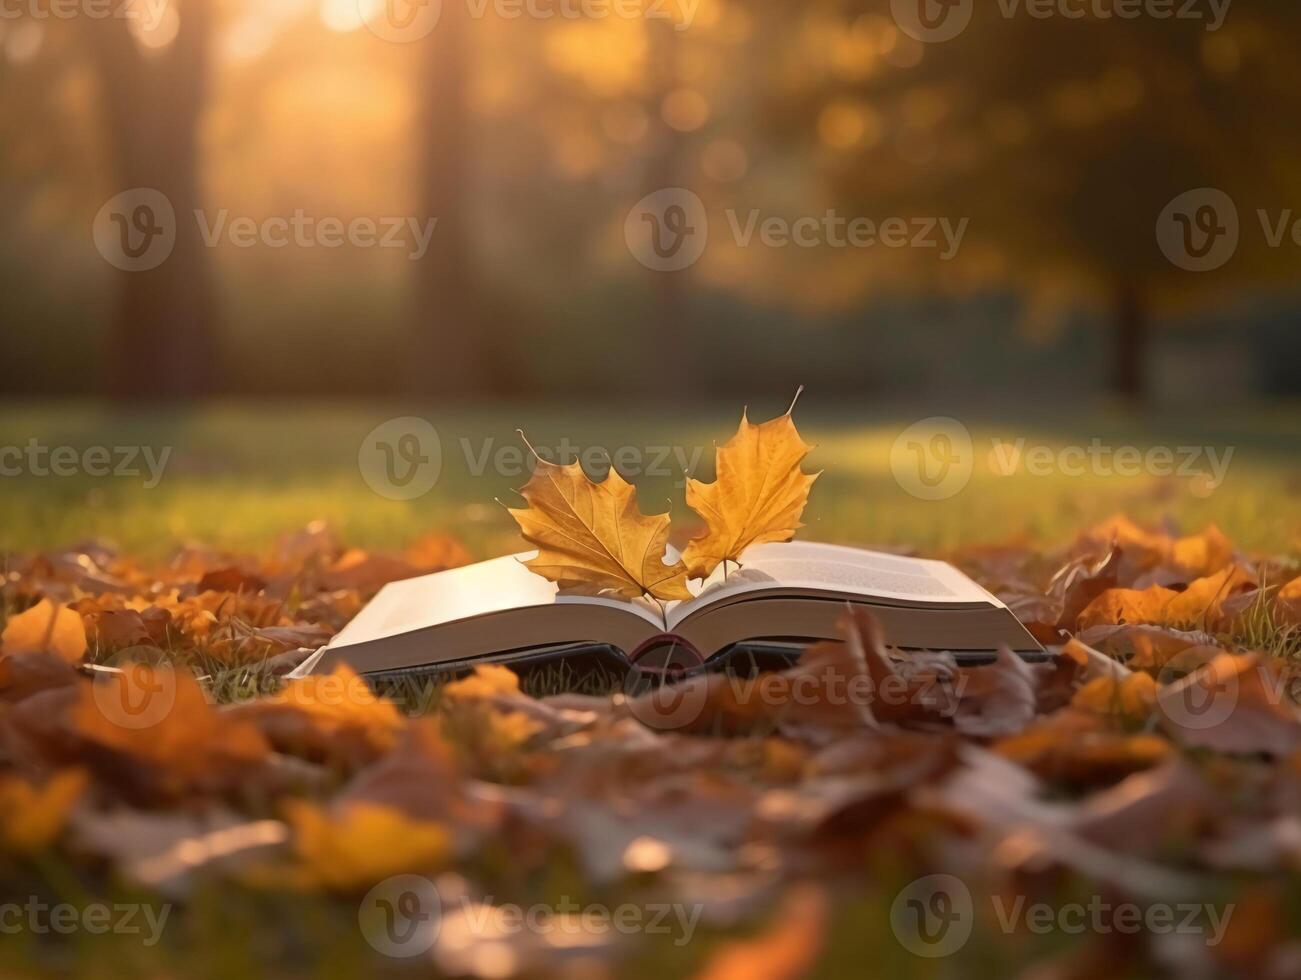 Book on a leaf with maple tree at background. photo